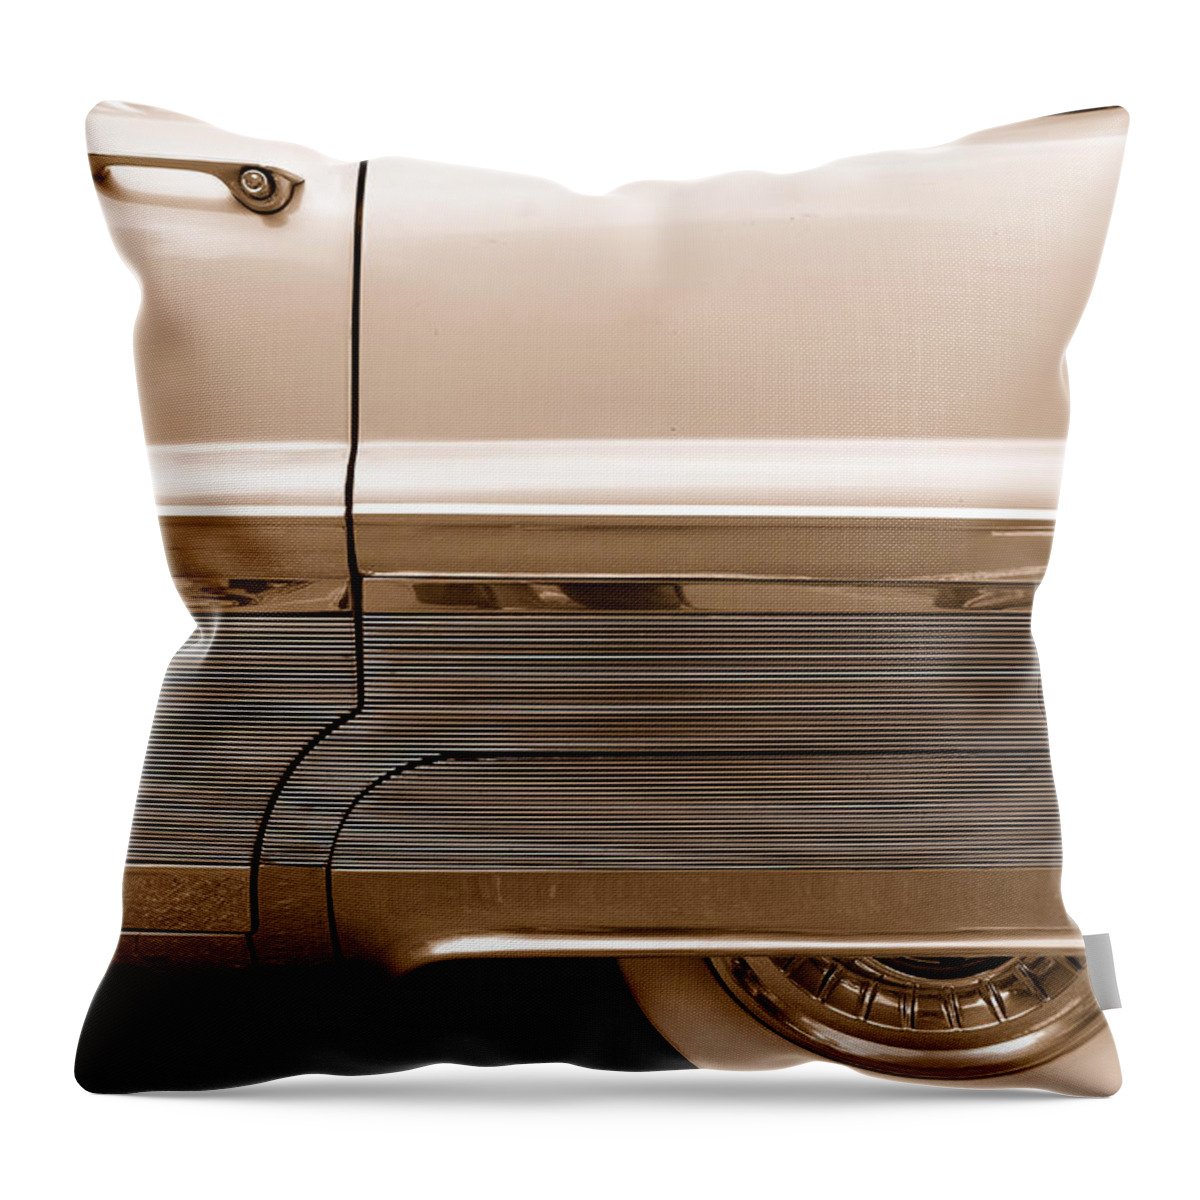 Automobiles Throw Pillow featuring the photograph Chrome by John Schneider